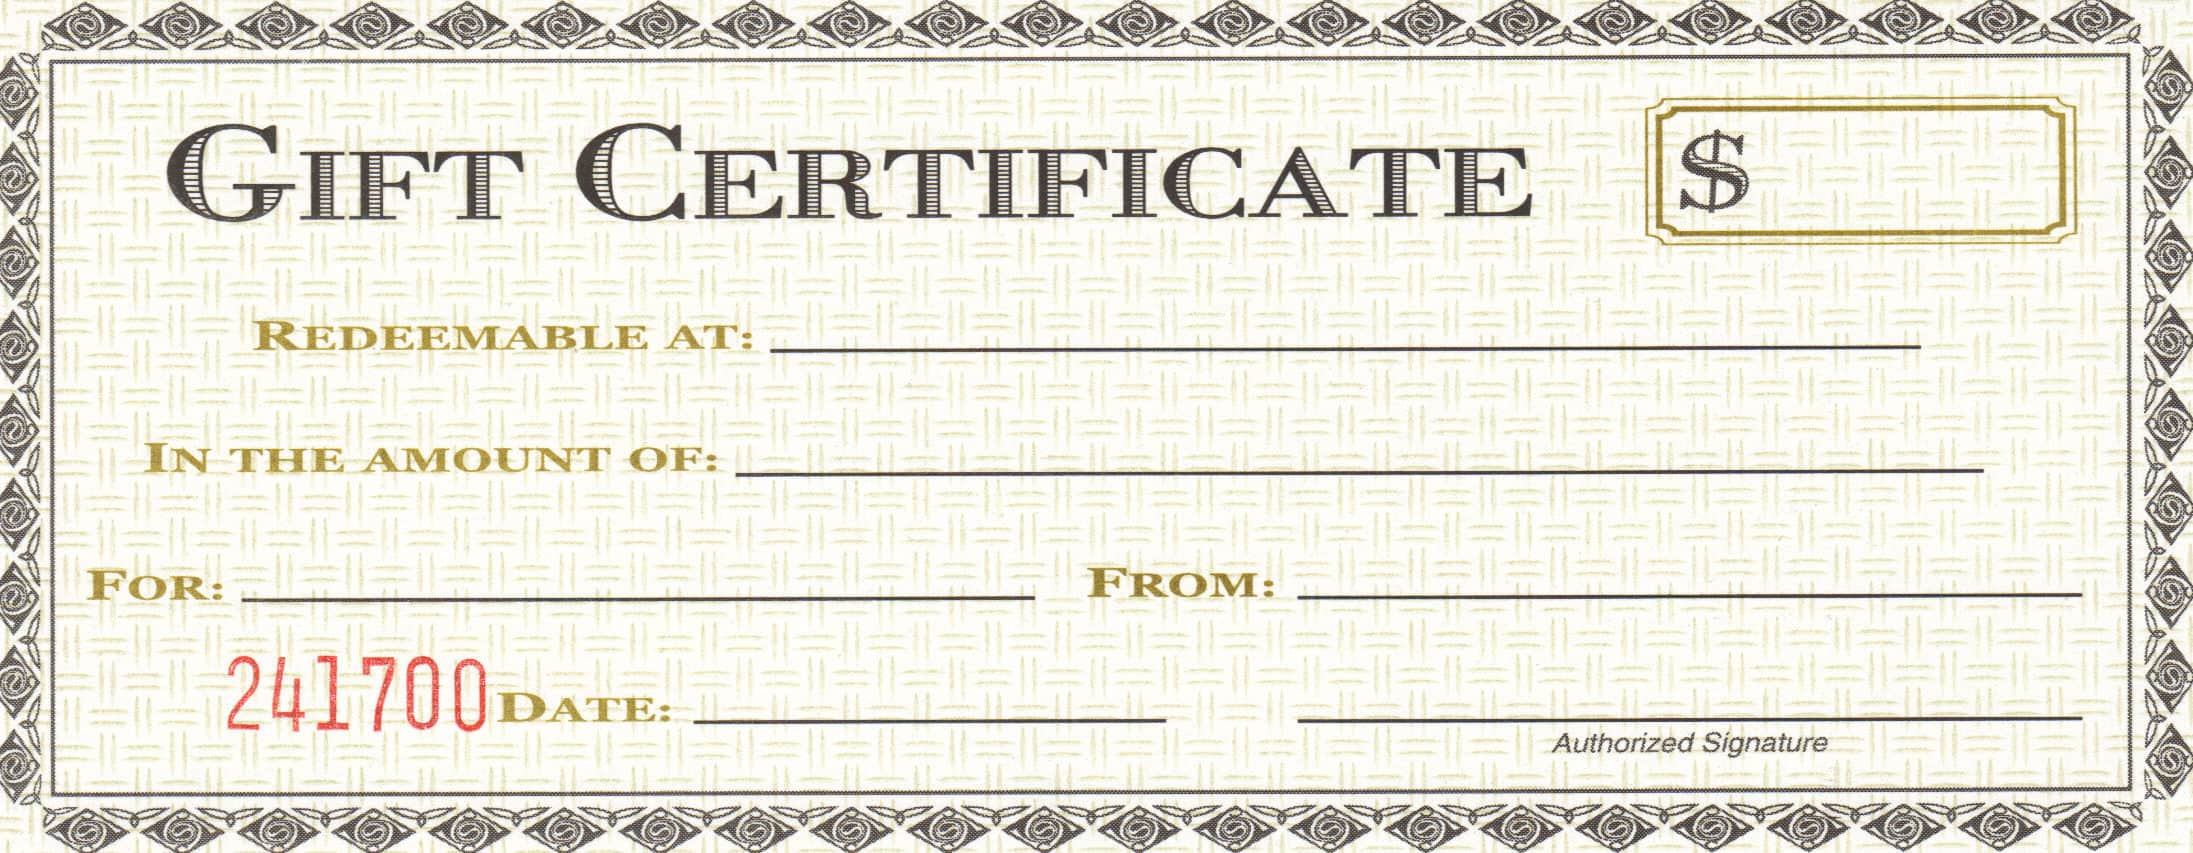 printable gift certificate template free microsoft word